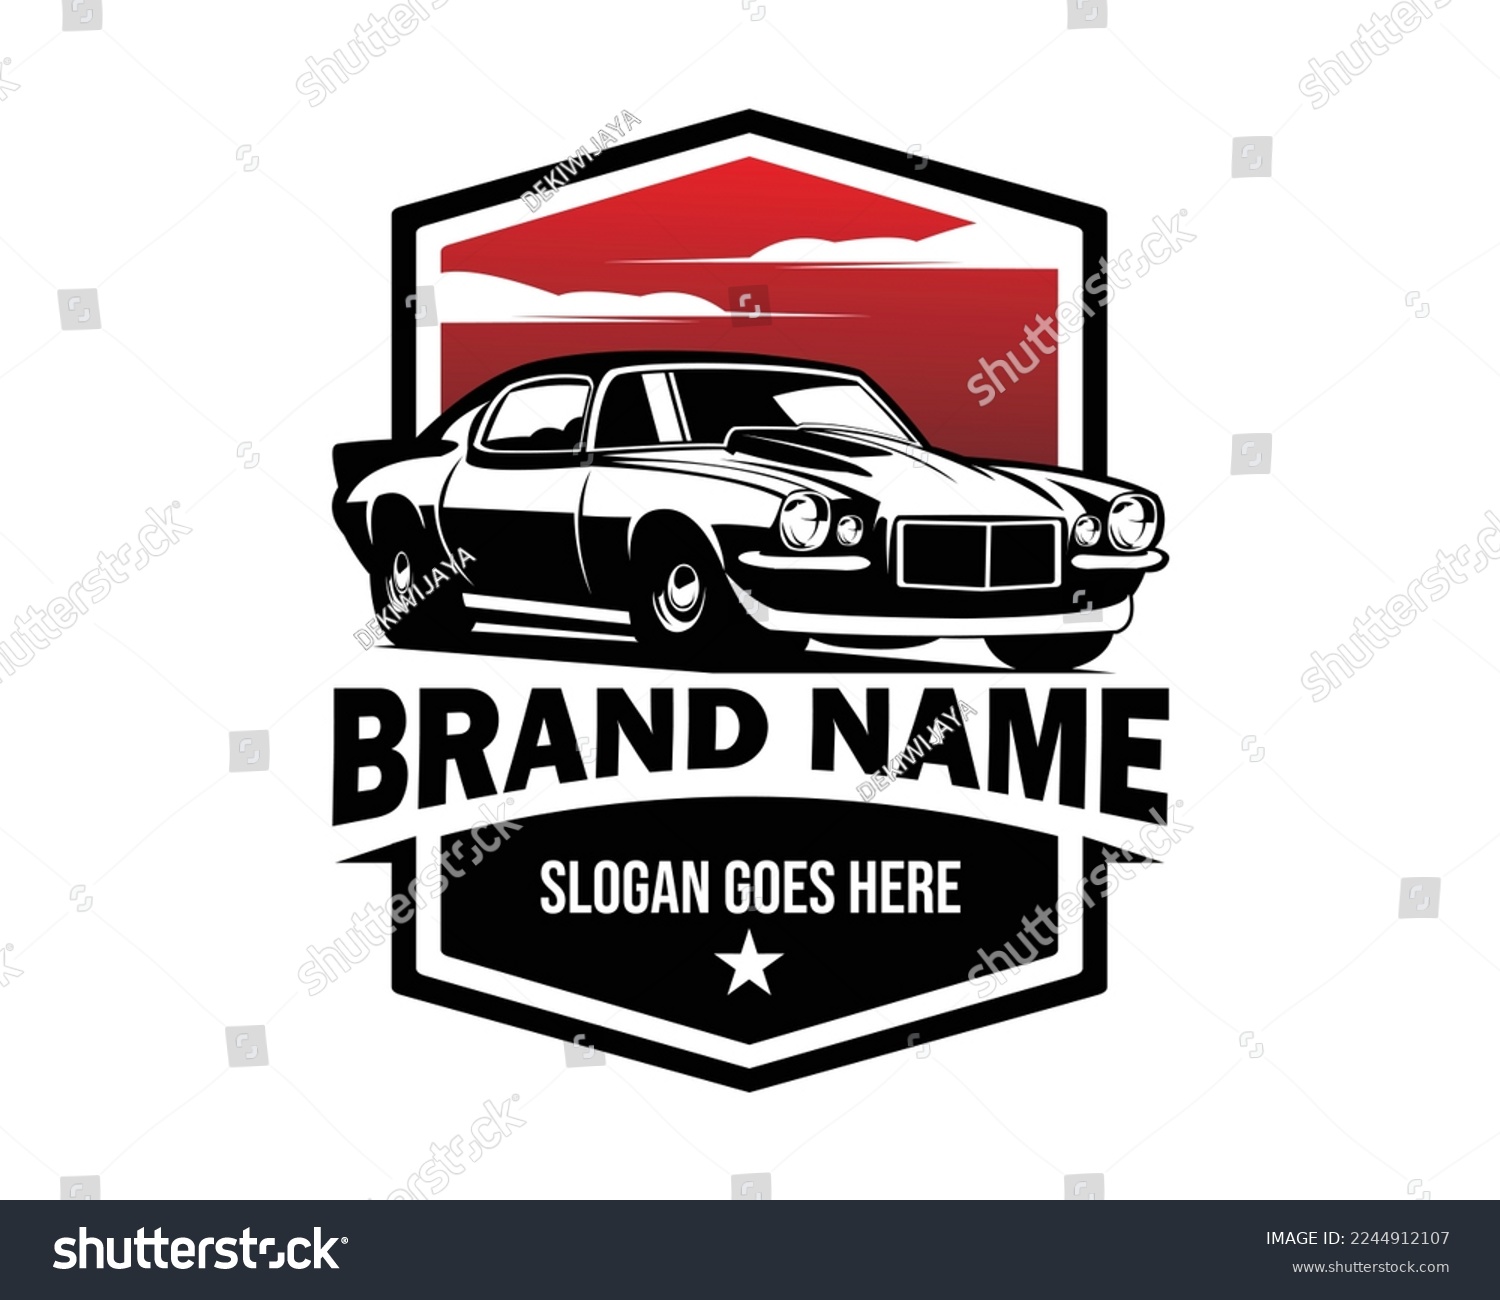 SVG of Chevy Camaro car logo. vector illustration silhouette design. with a red sky as a background. Best for badge, emblem, icon and sticker design. svg